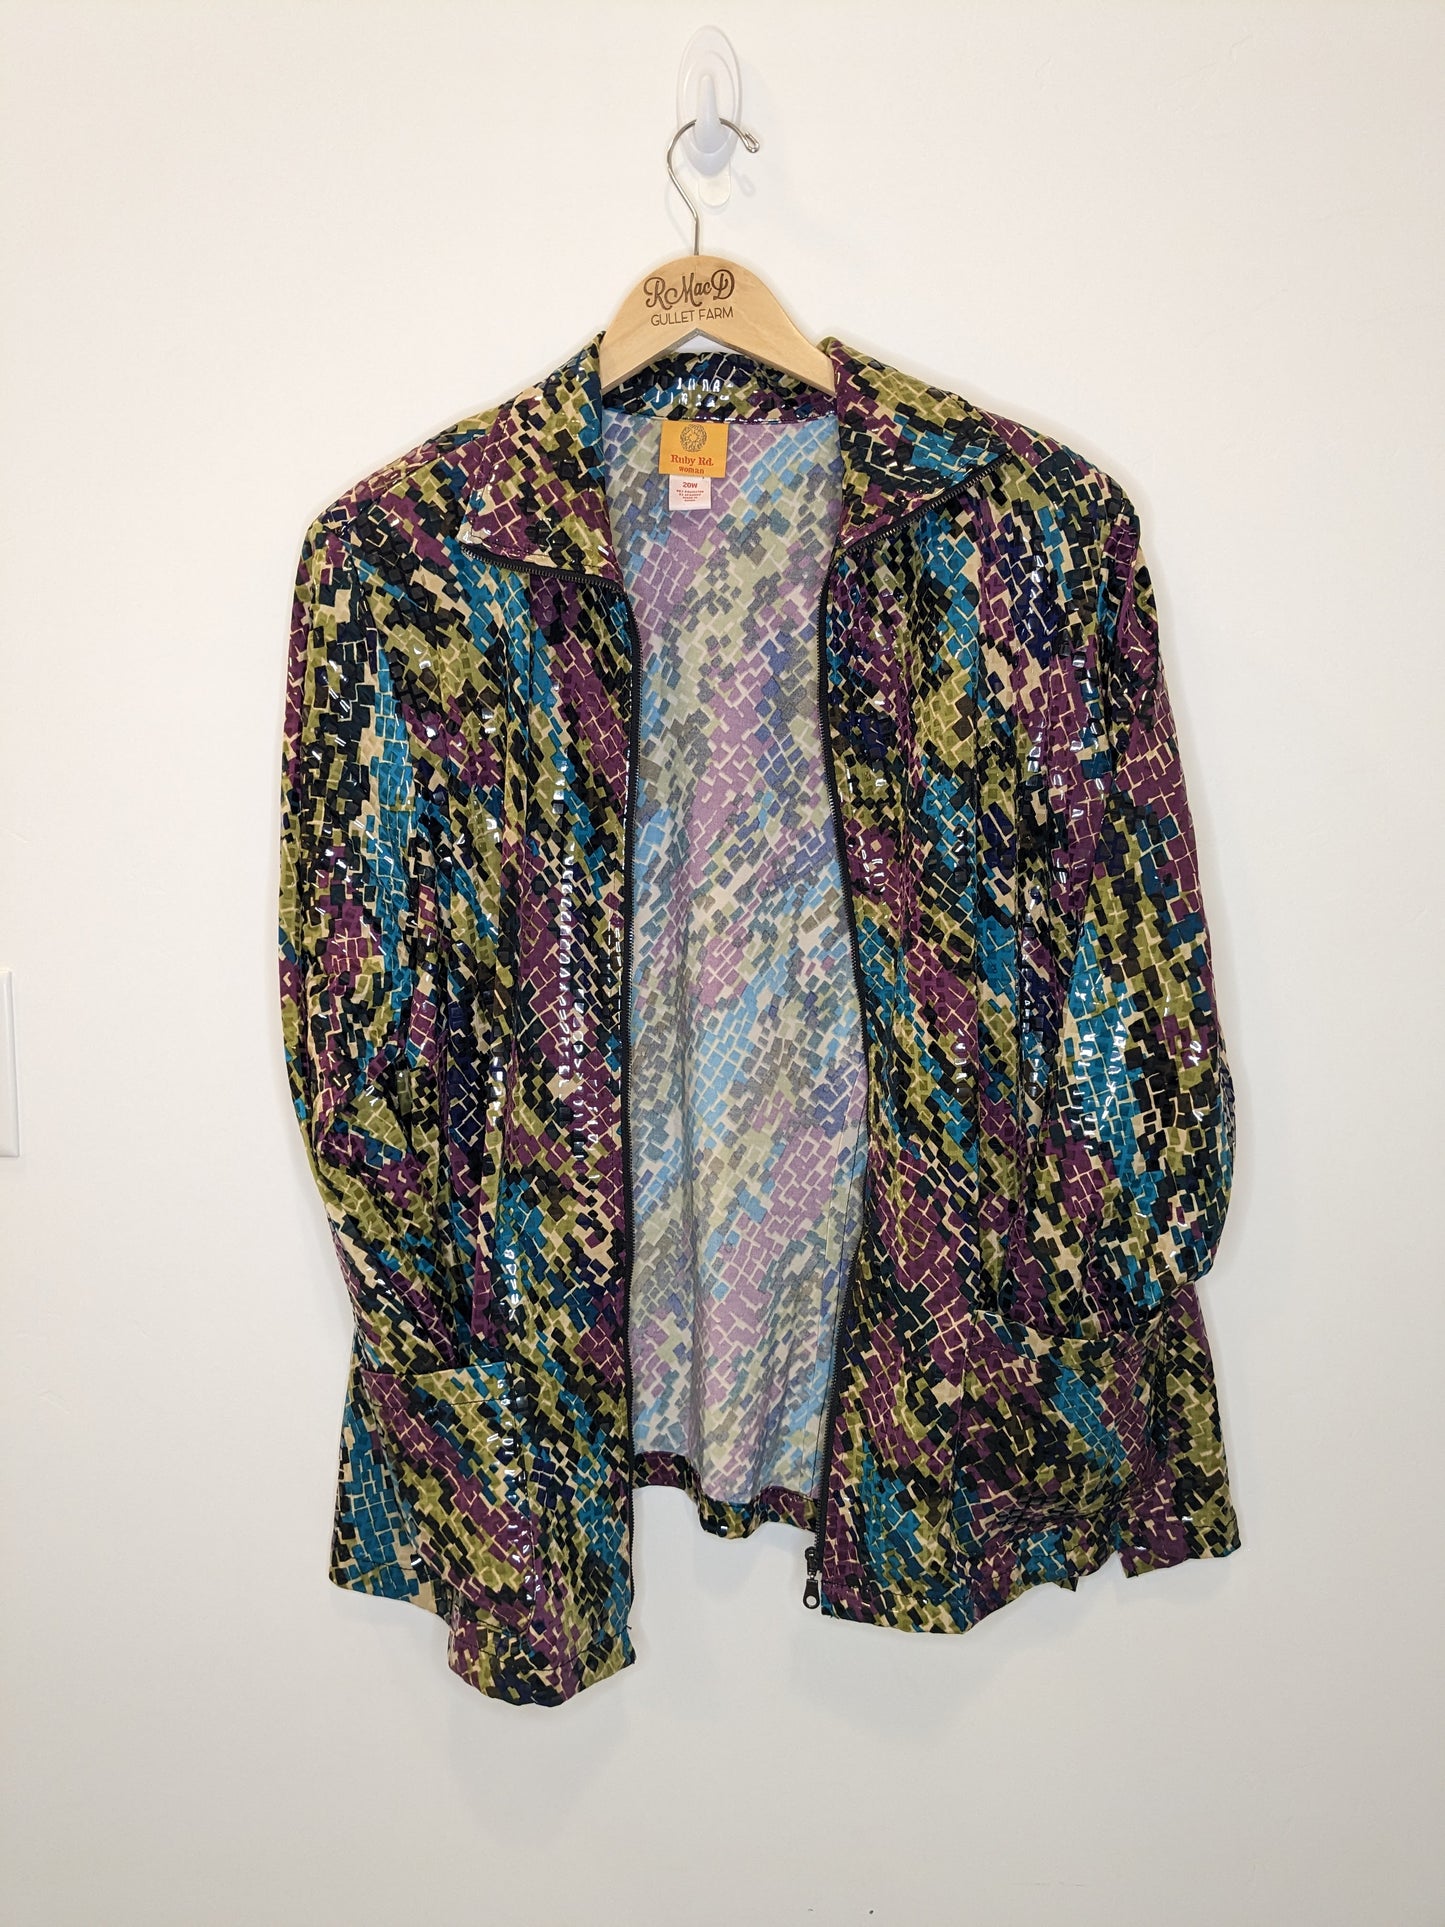 Vintage 80's Shiney Abstract Zippable Colorful Jacket